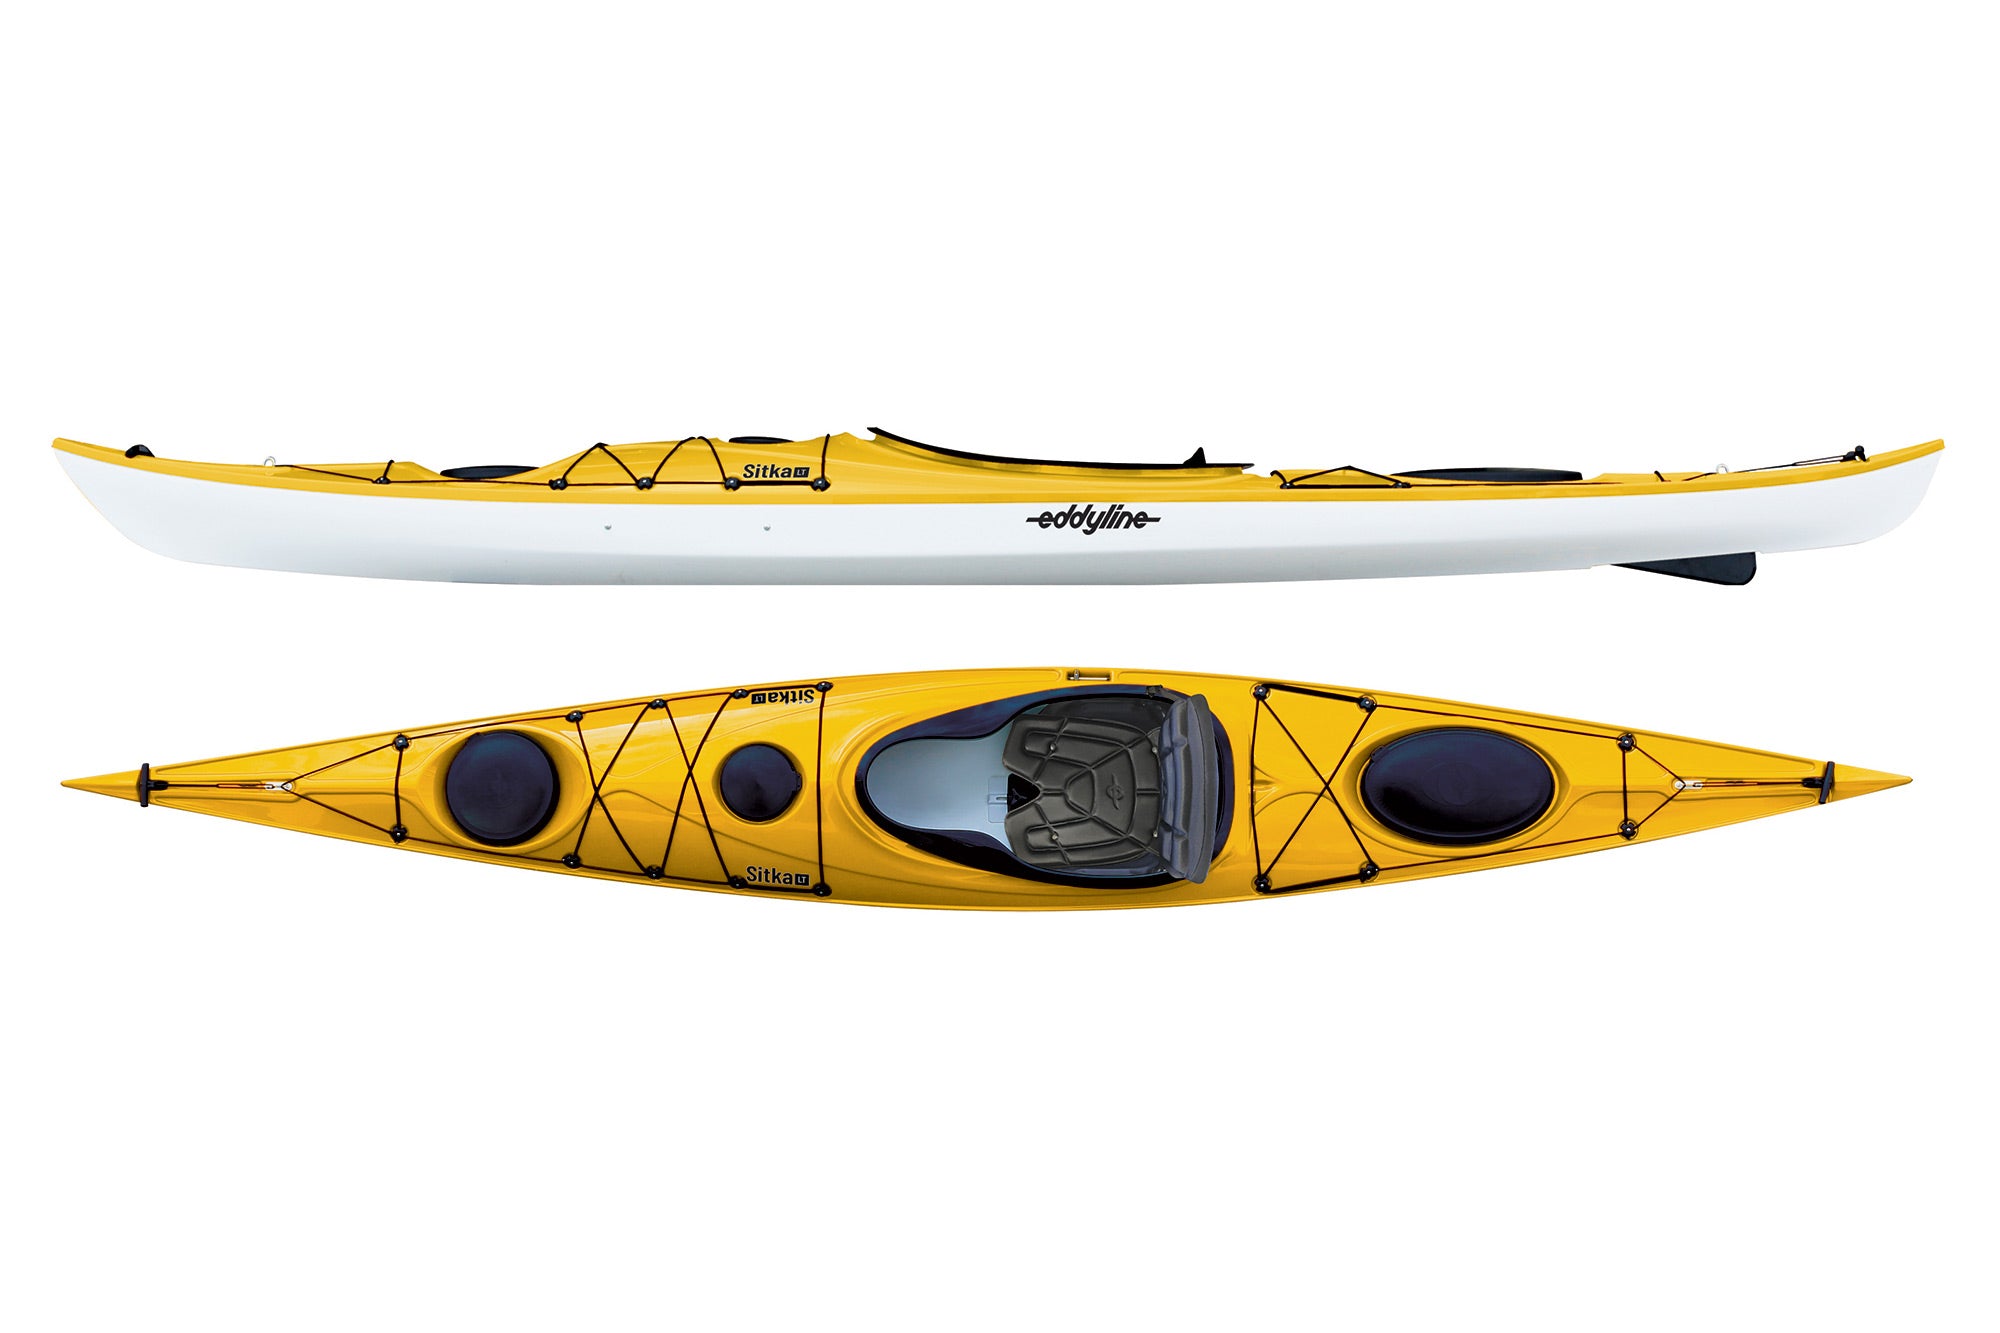 Here are our picks for the best tandem kayaks in every category